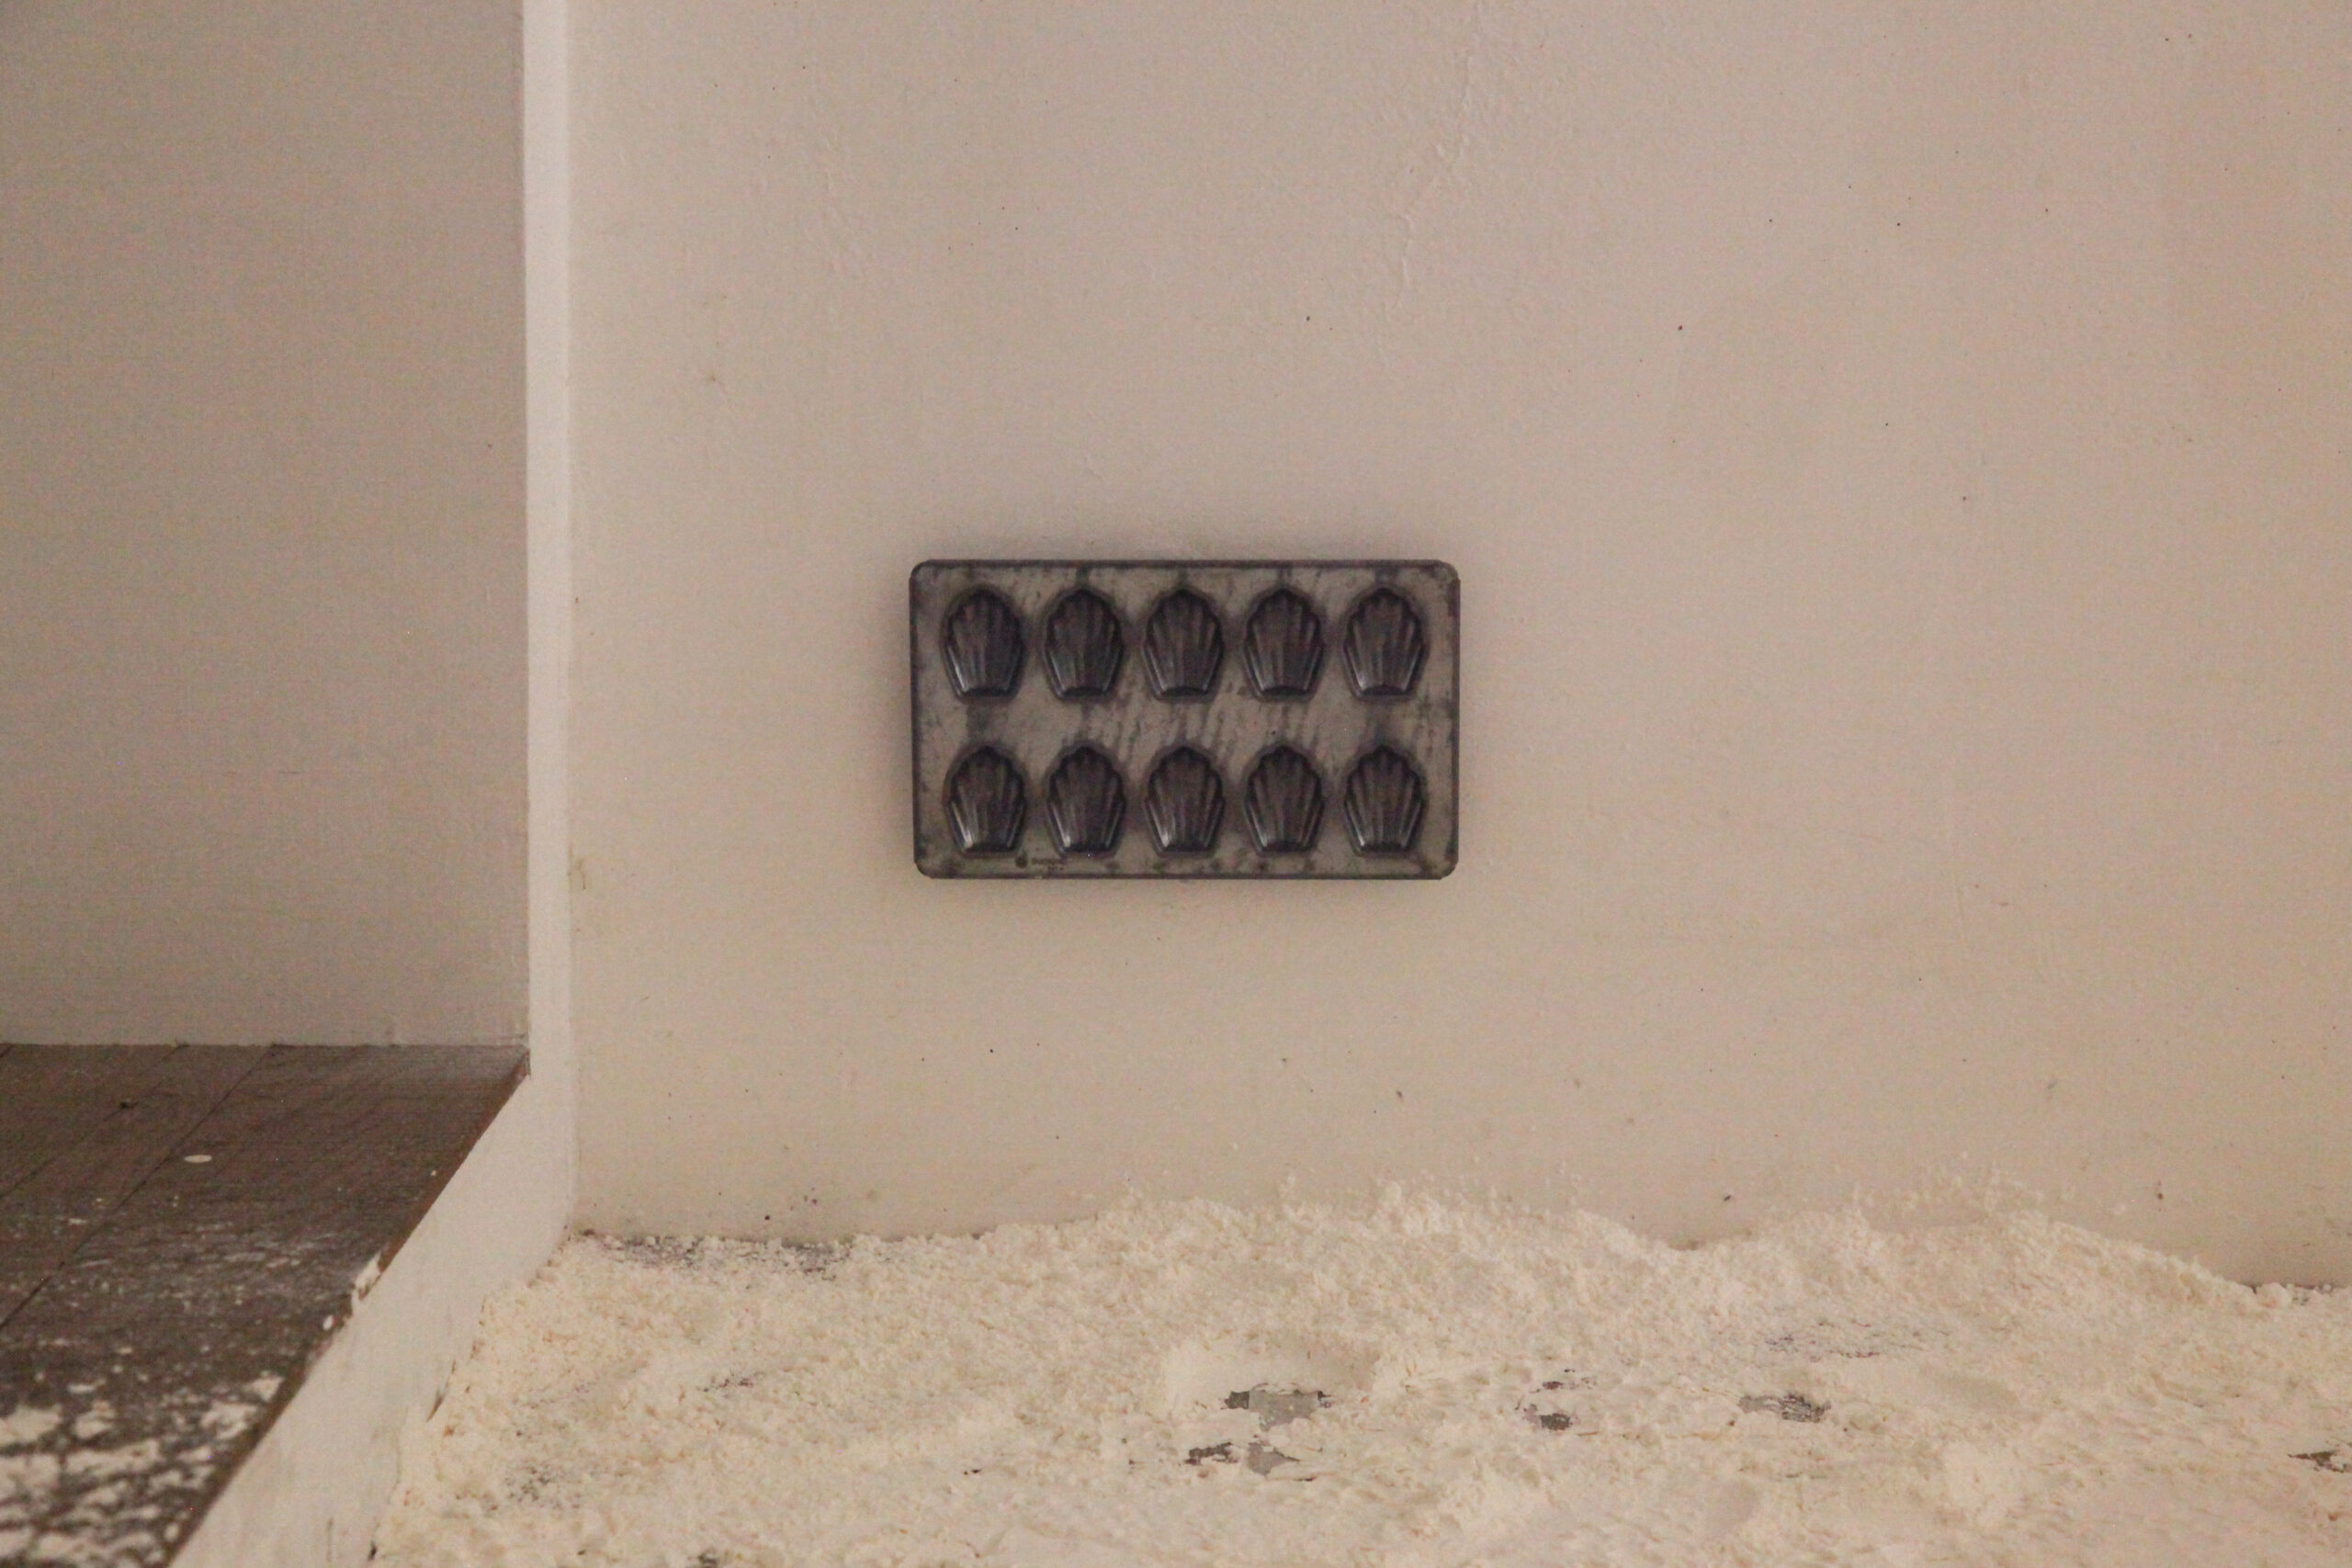 A silver tray mold for ten madeleine cookies is hung up on the wall slightly above the ground. Below on the ground the floor is covered in a layer of flour.